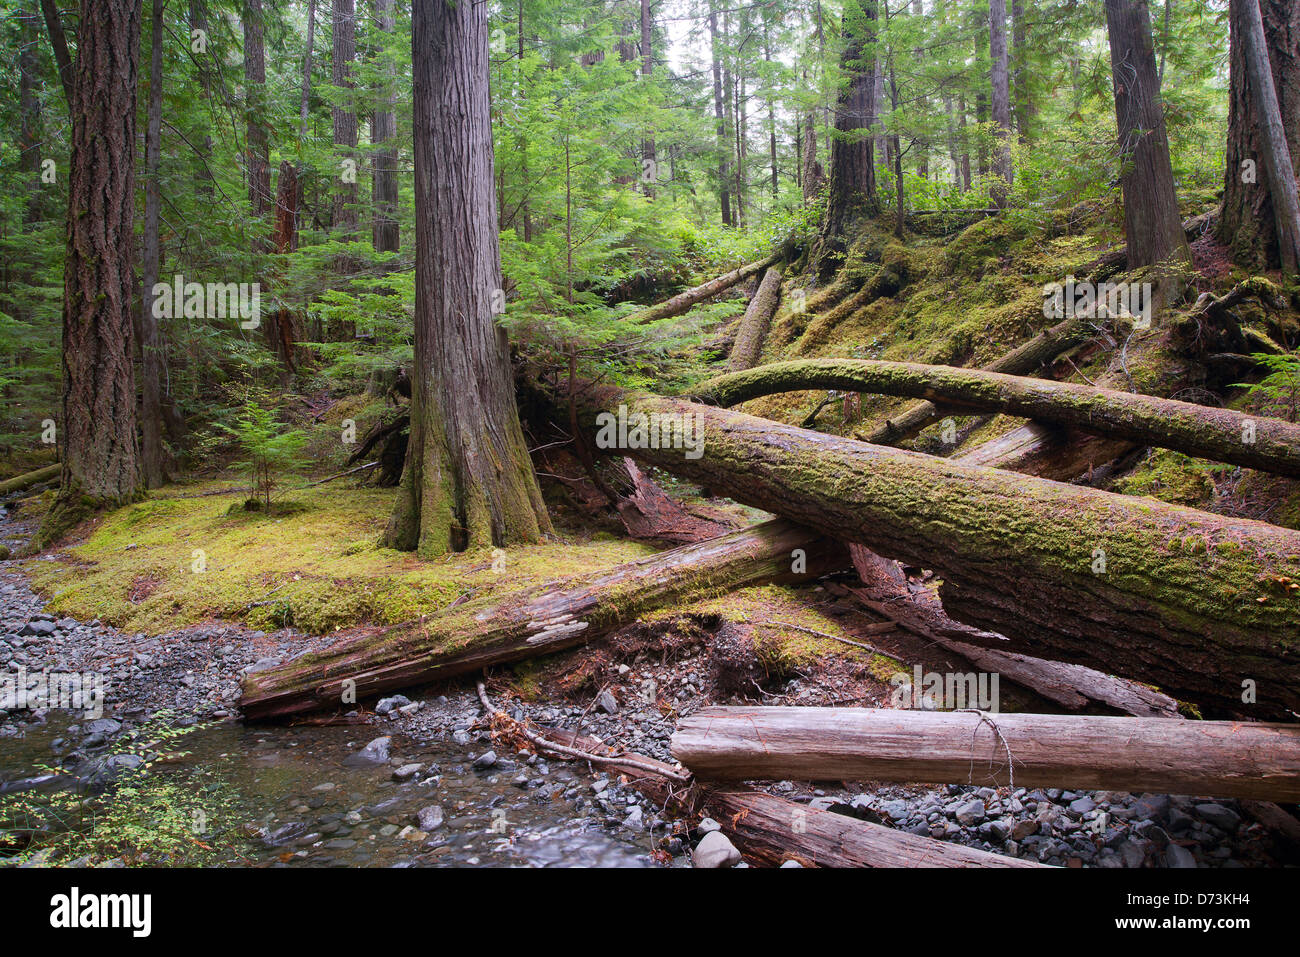 old-growth original  forest in western Canada,  Strathcona Provincial Park, Vancouver Island British Columbia Canada Stock Photo